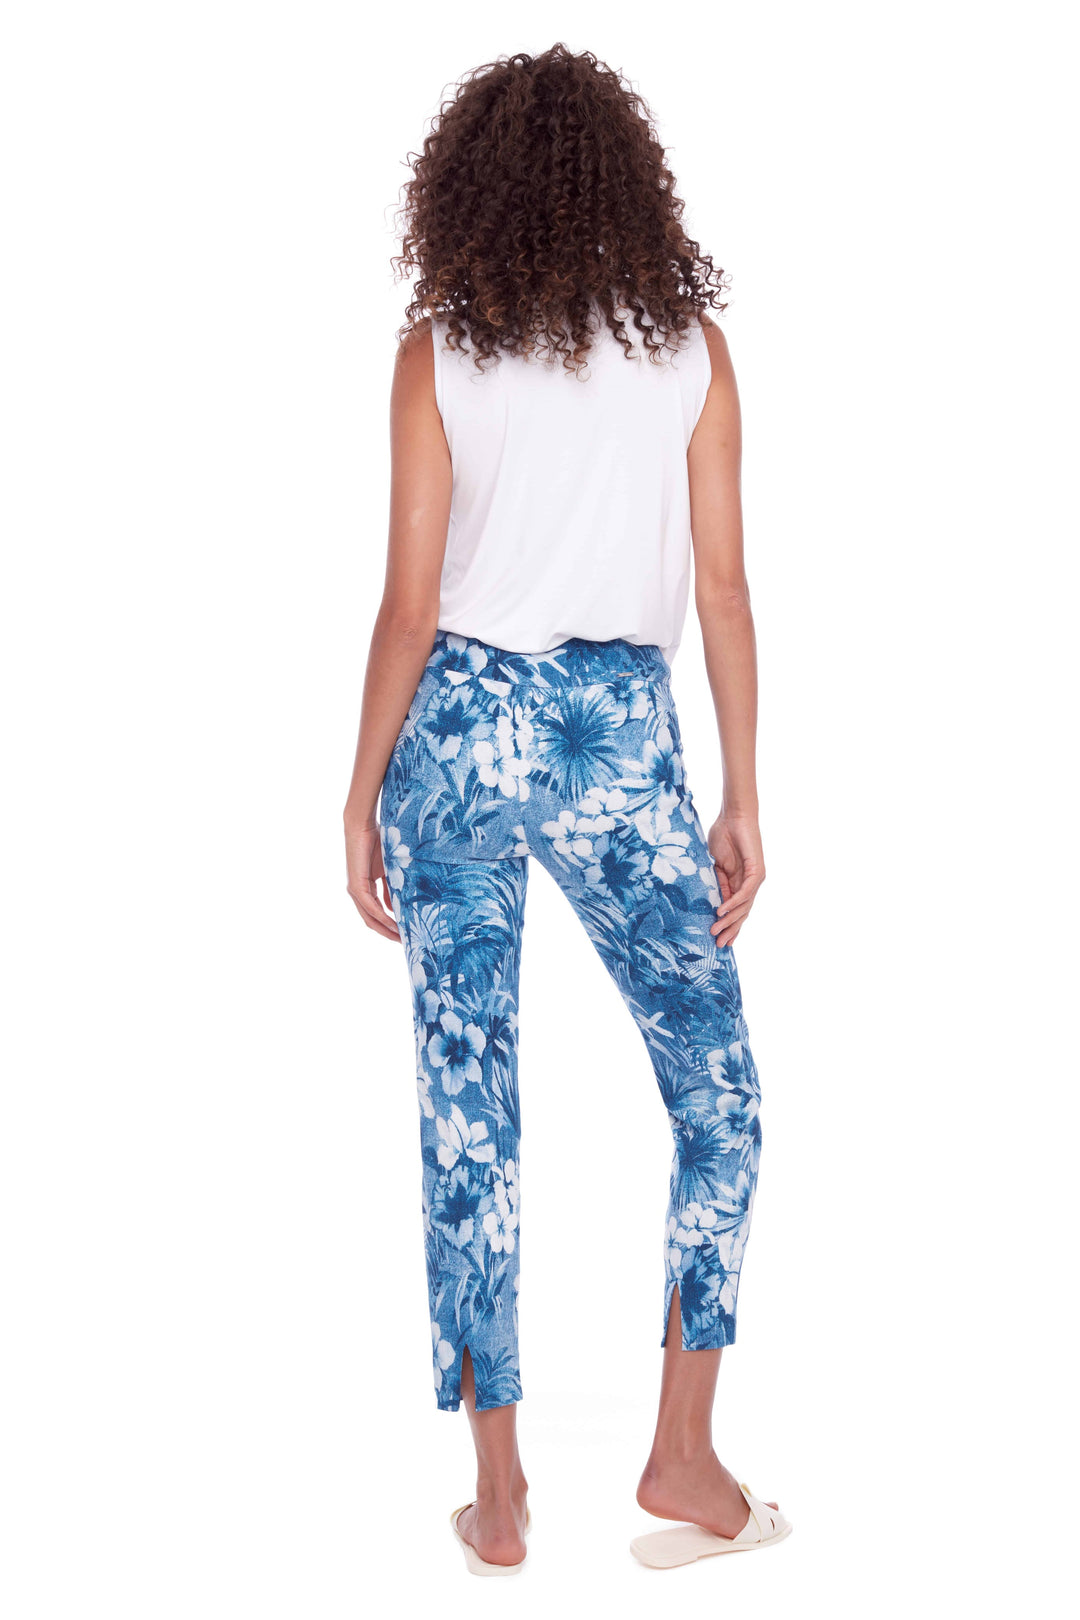 UP! Womens Pant 68109